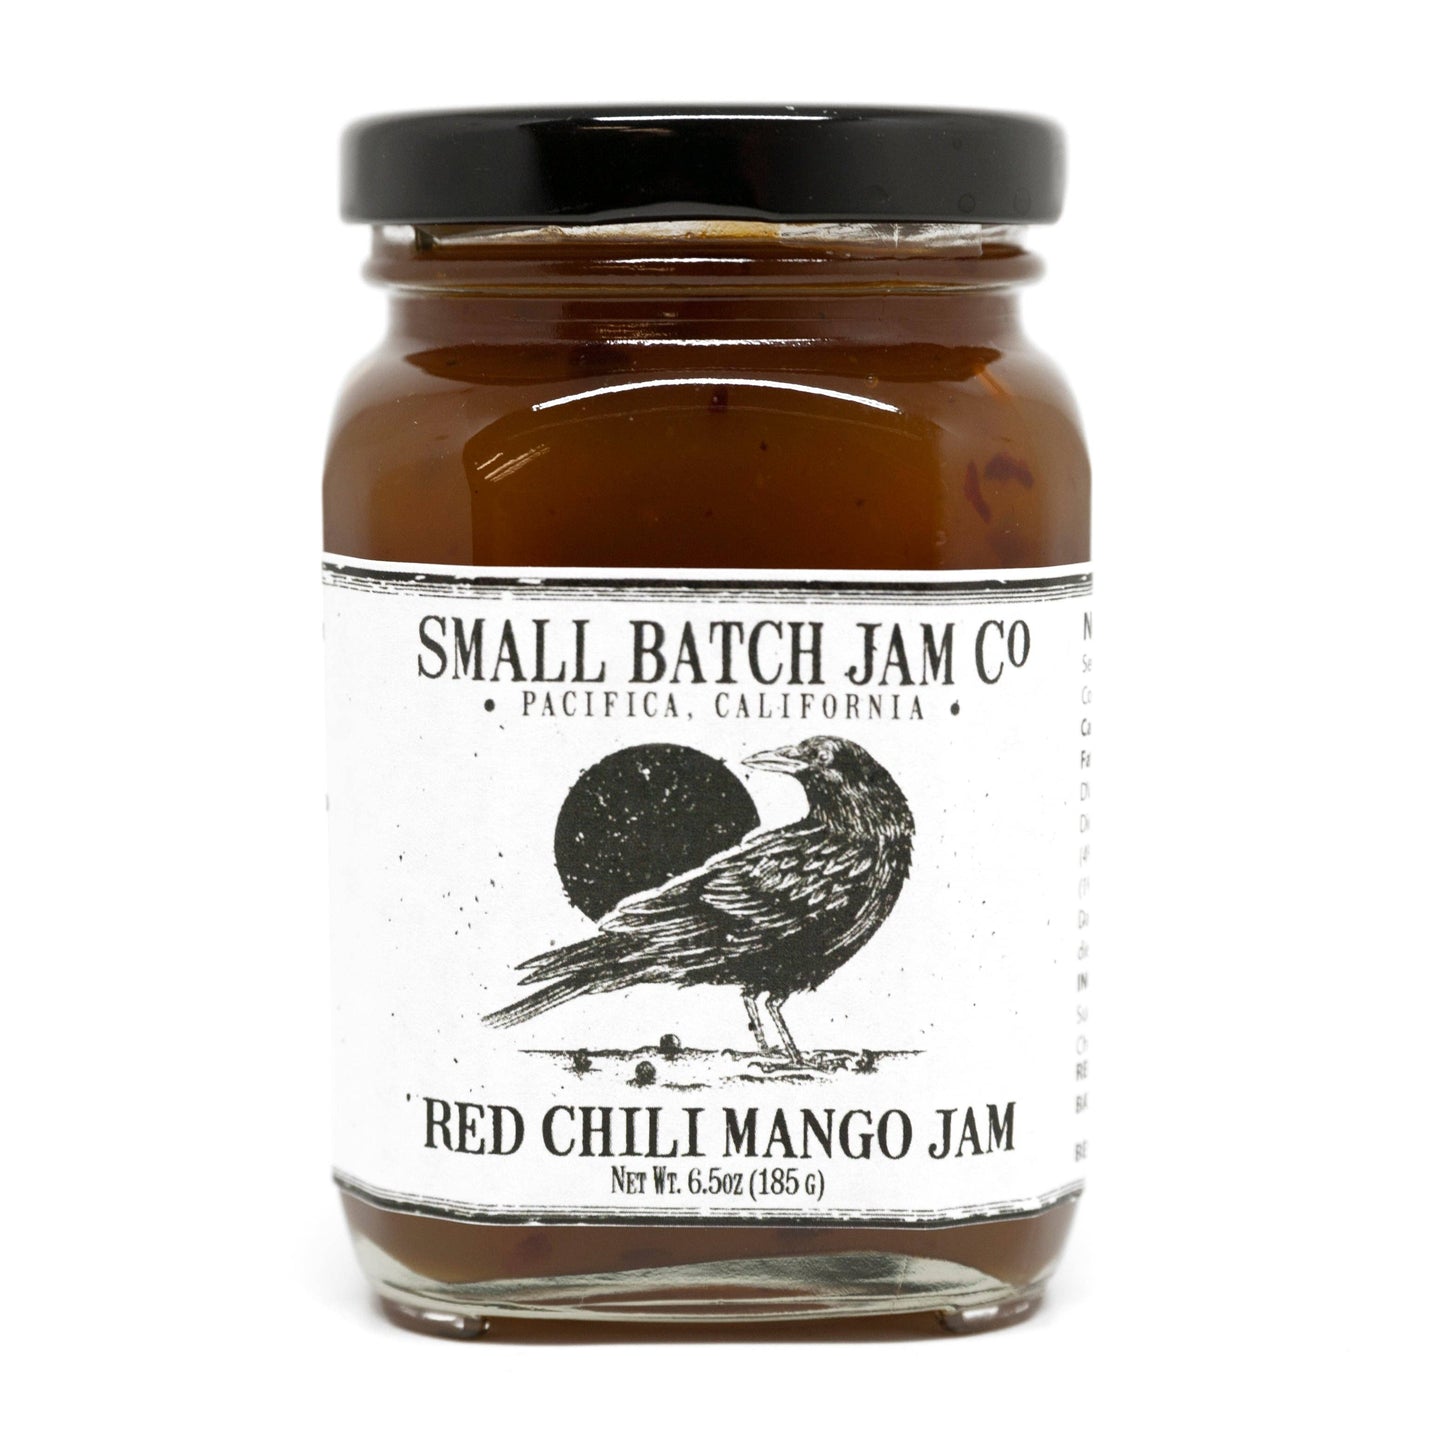 Jam: Small Batch Jam Co from Pacifica, California